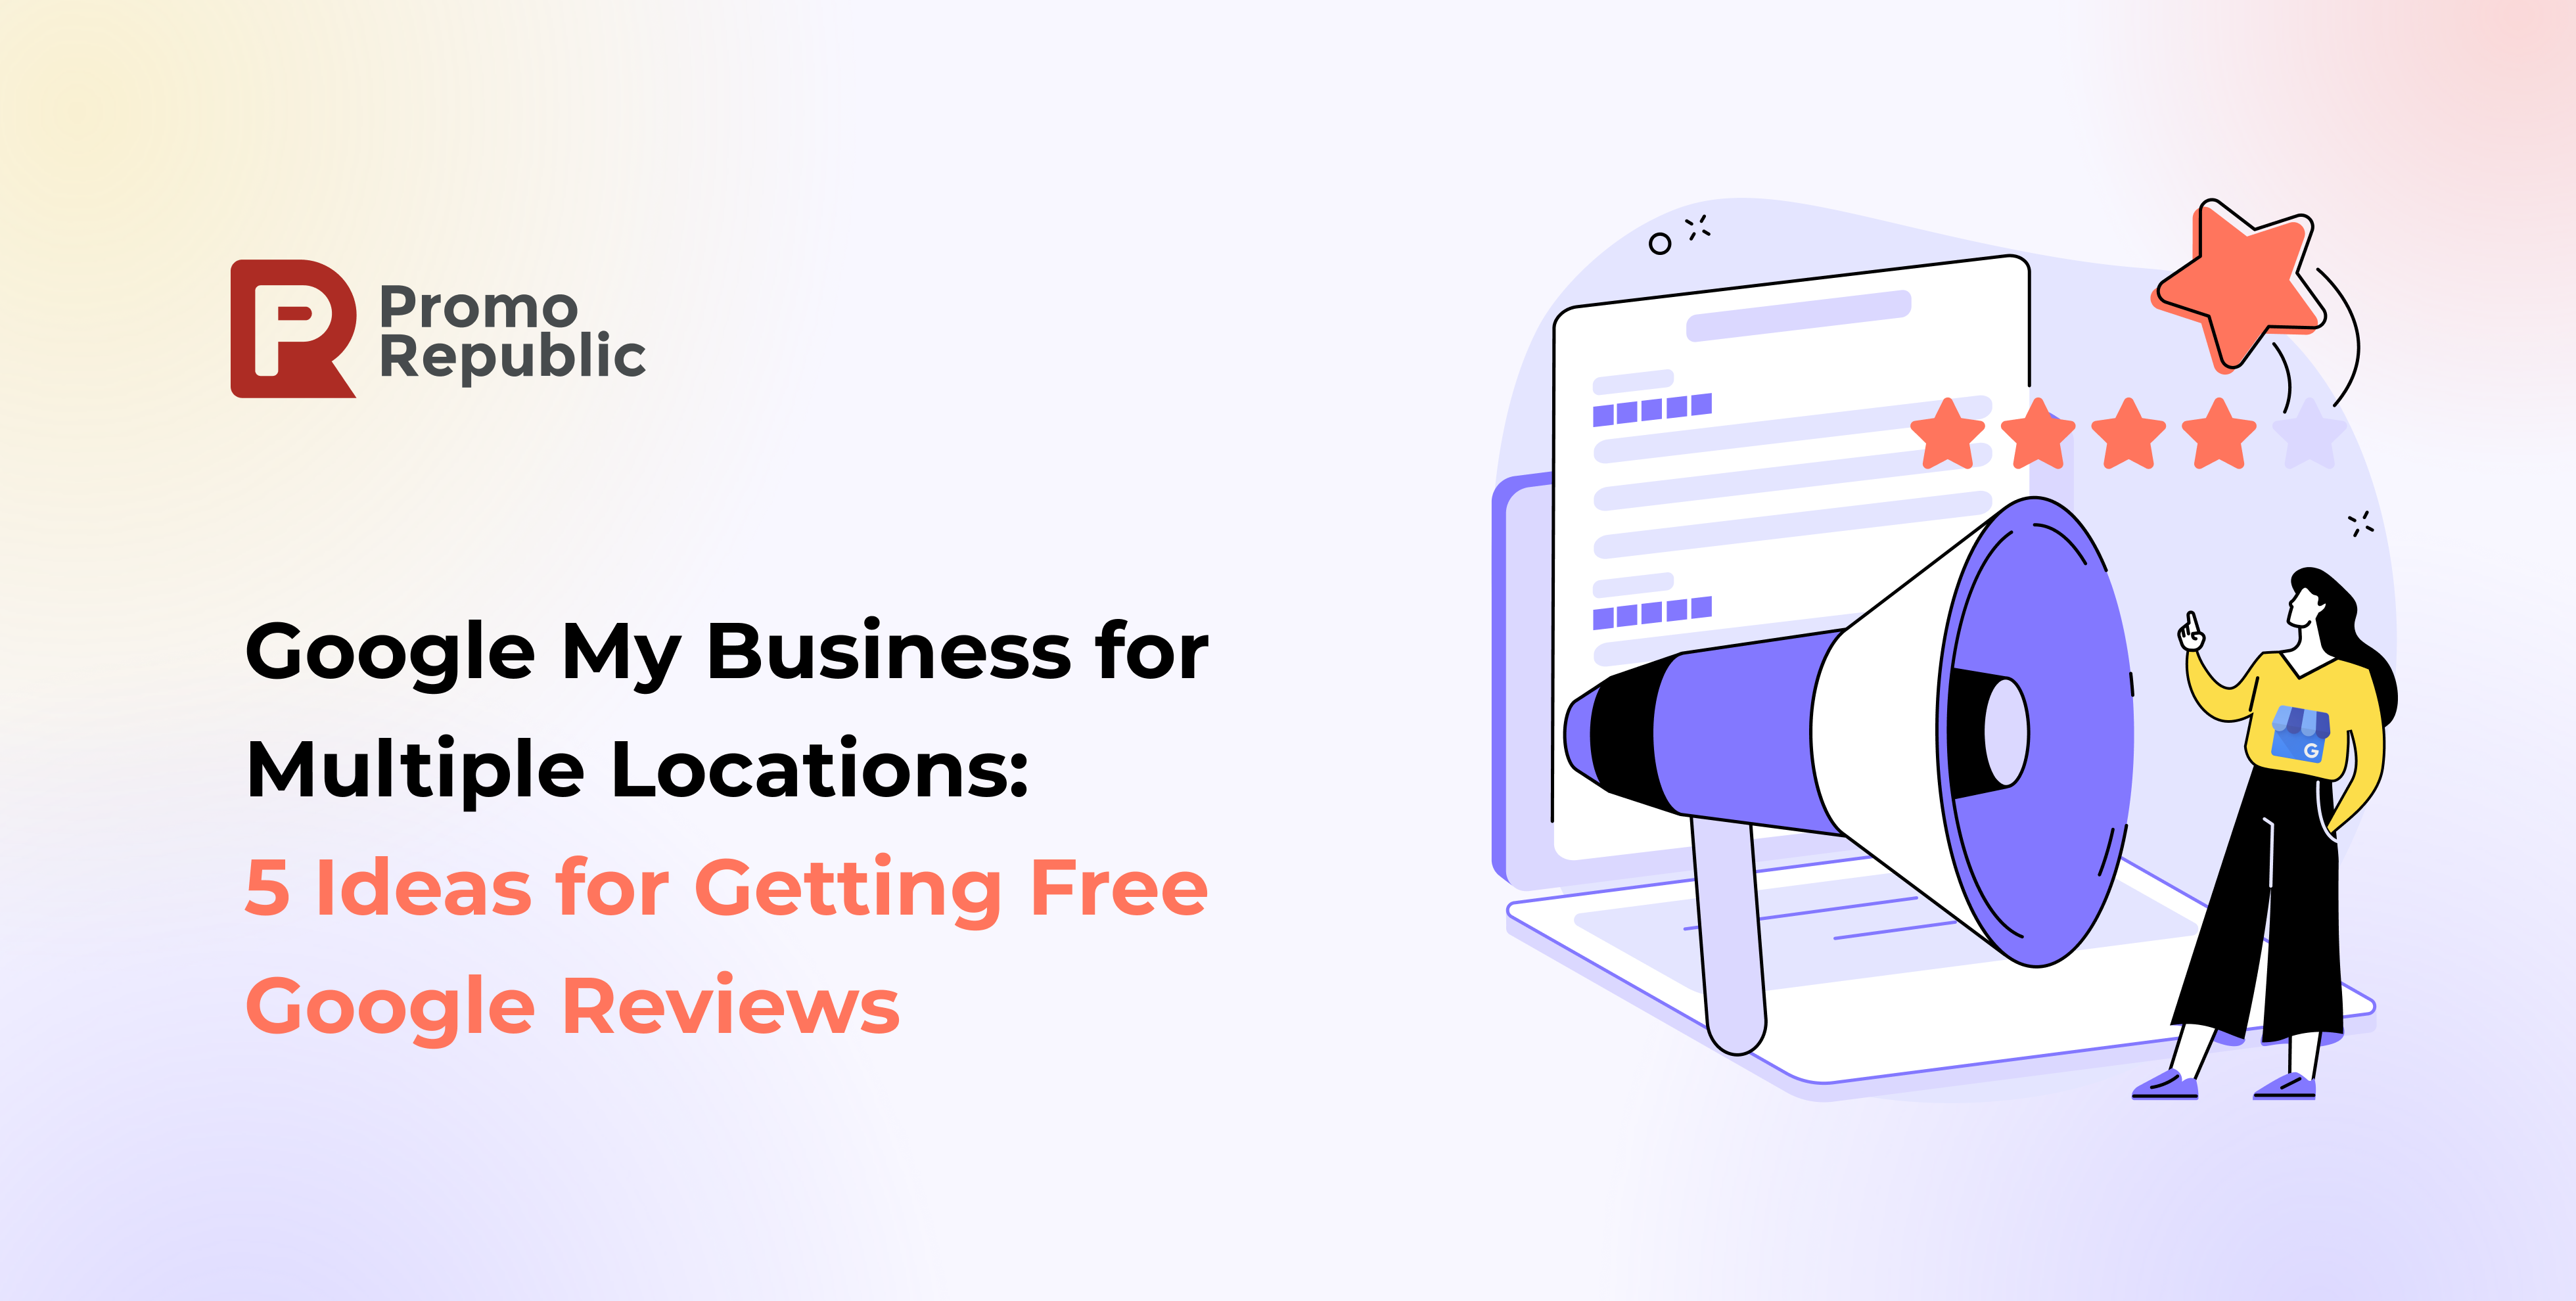 Google My Business for Multiple Locations